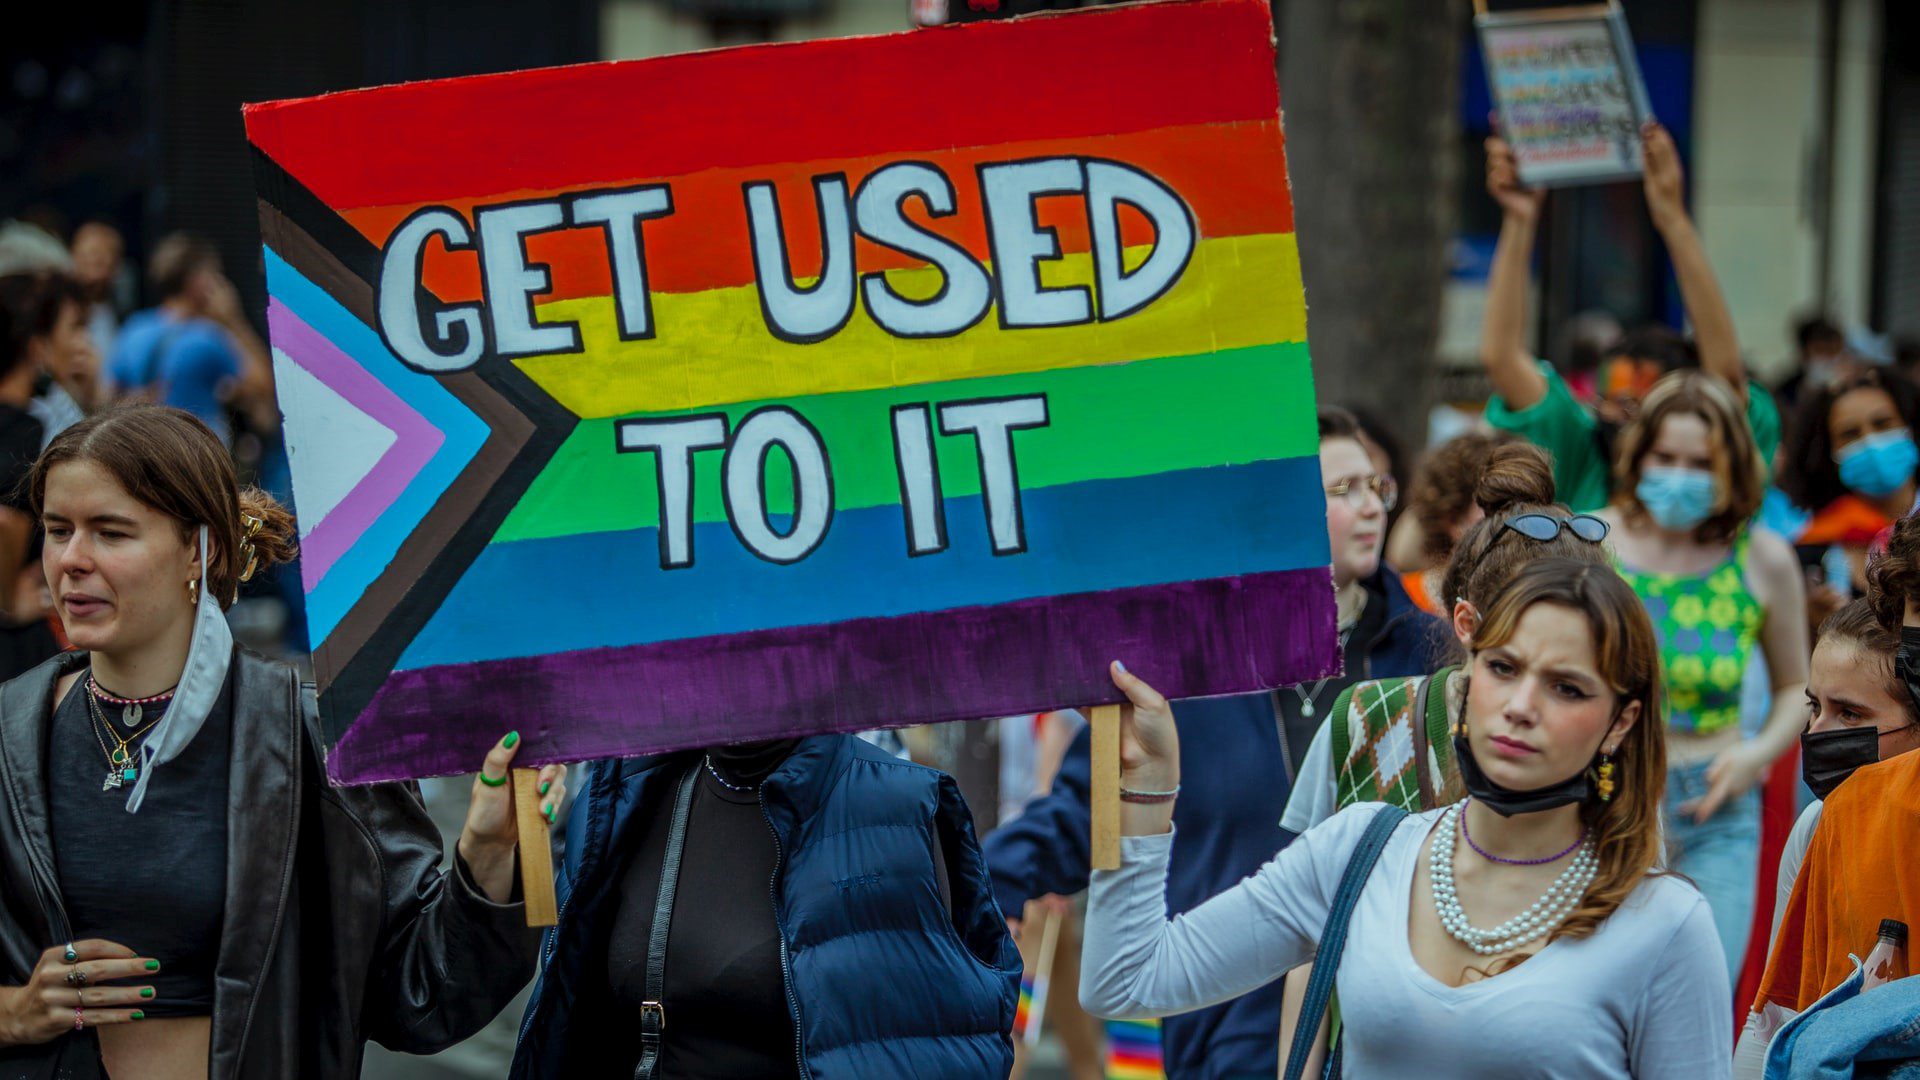 Proponents of Florida's "Don't Say Gay" bill claim it's about protecting students and families, yet it's merely a pretext for limiting freedom.